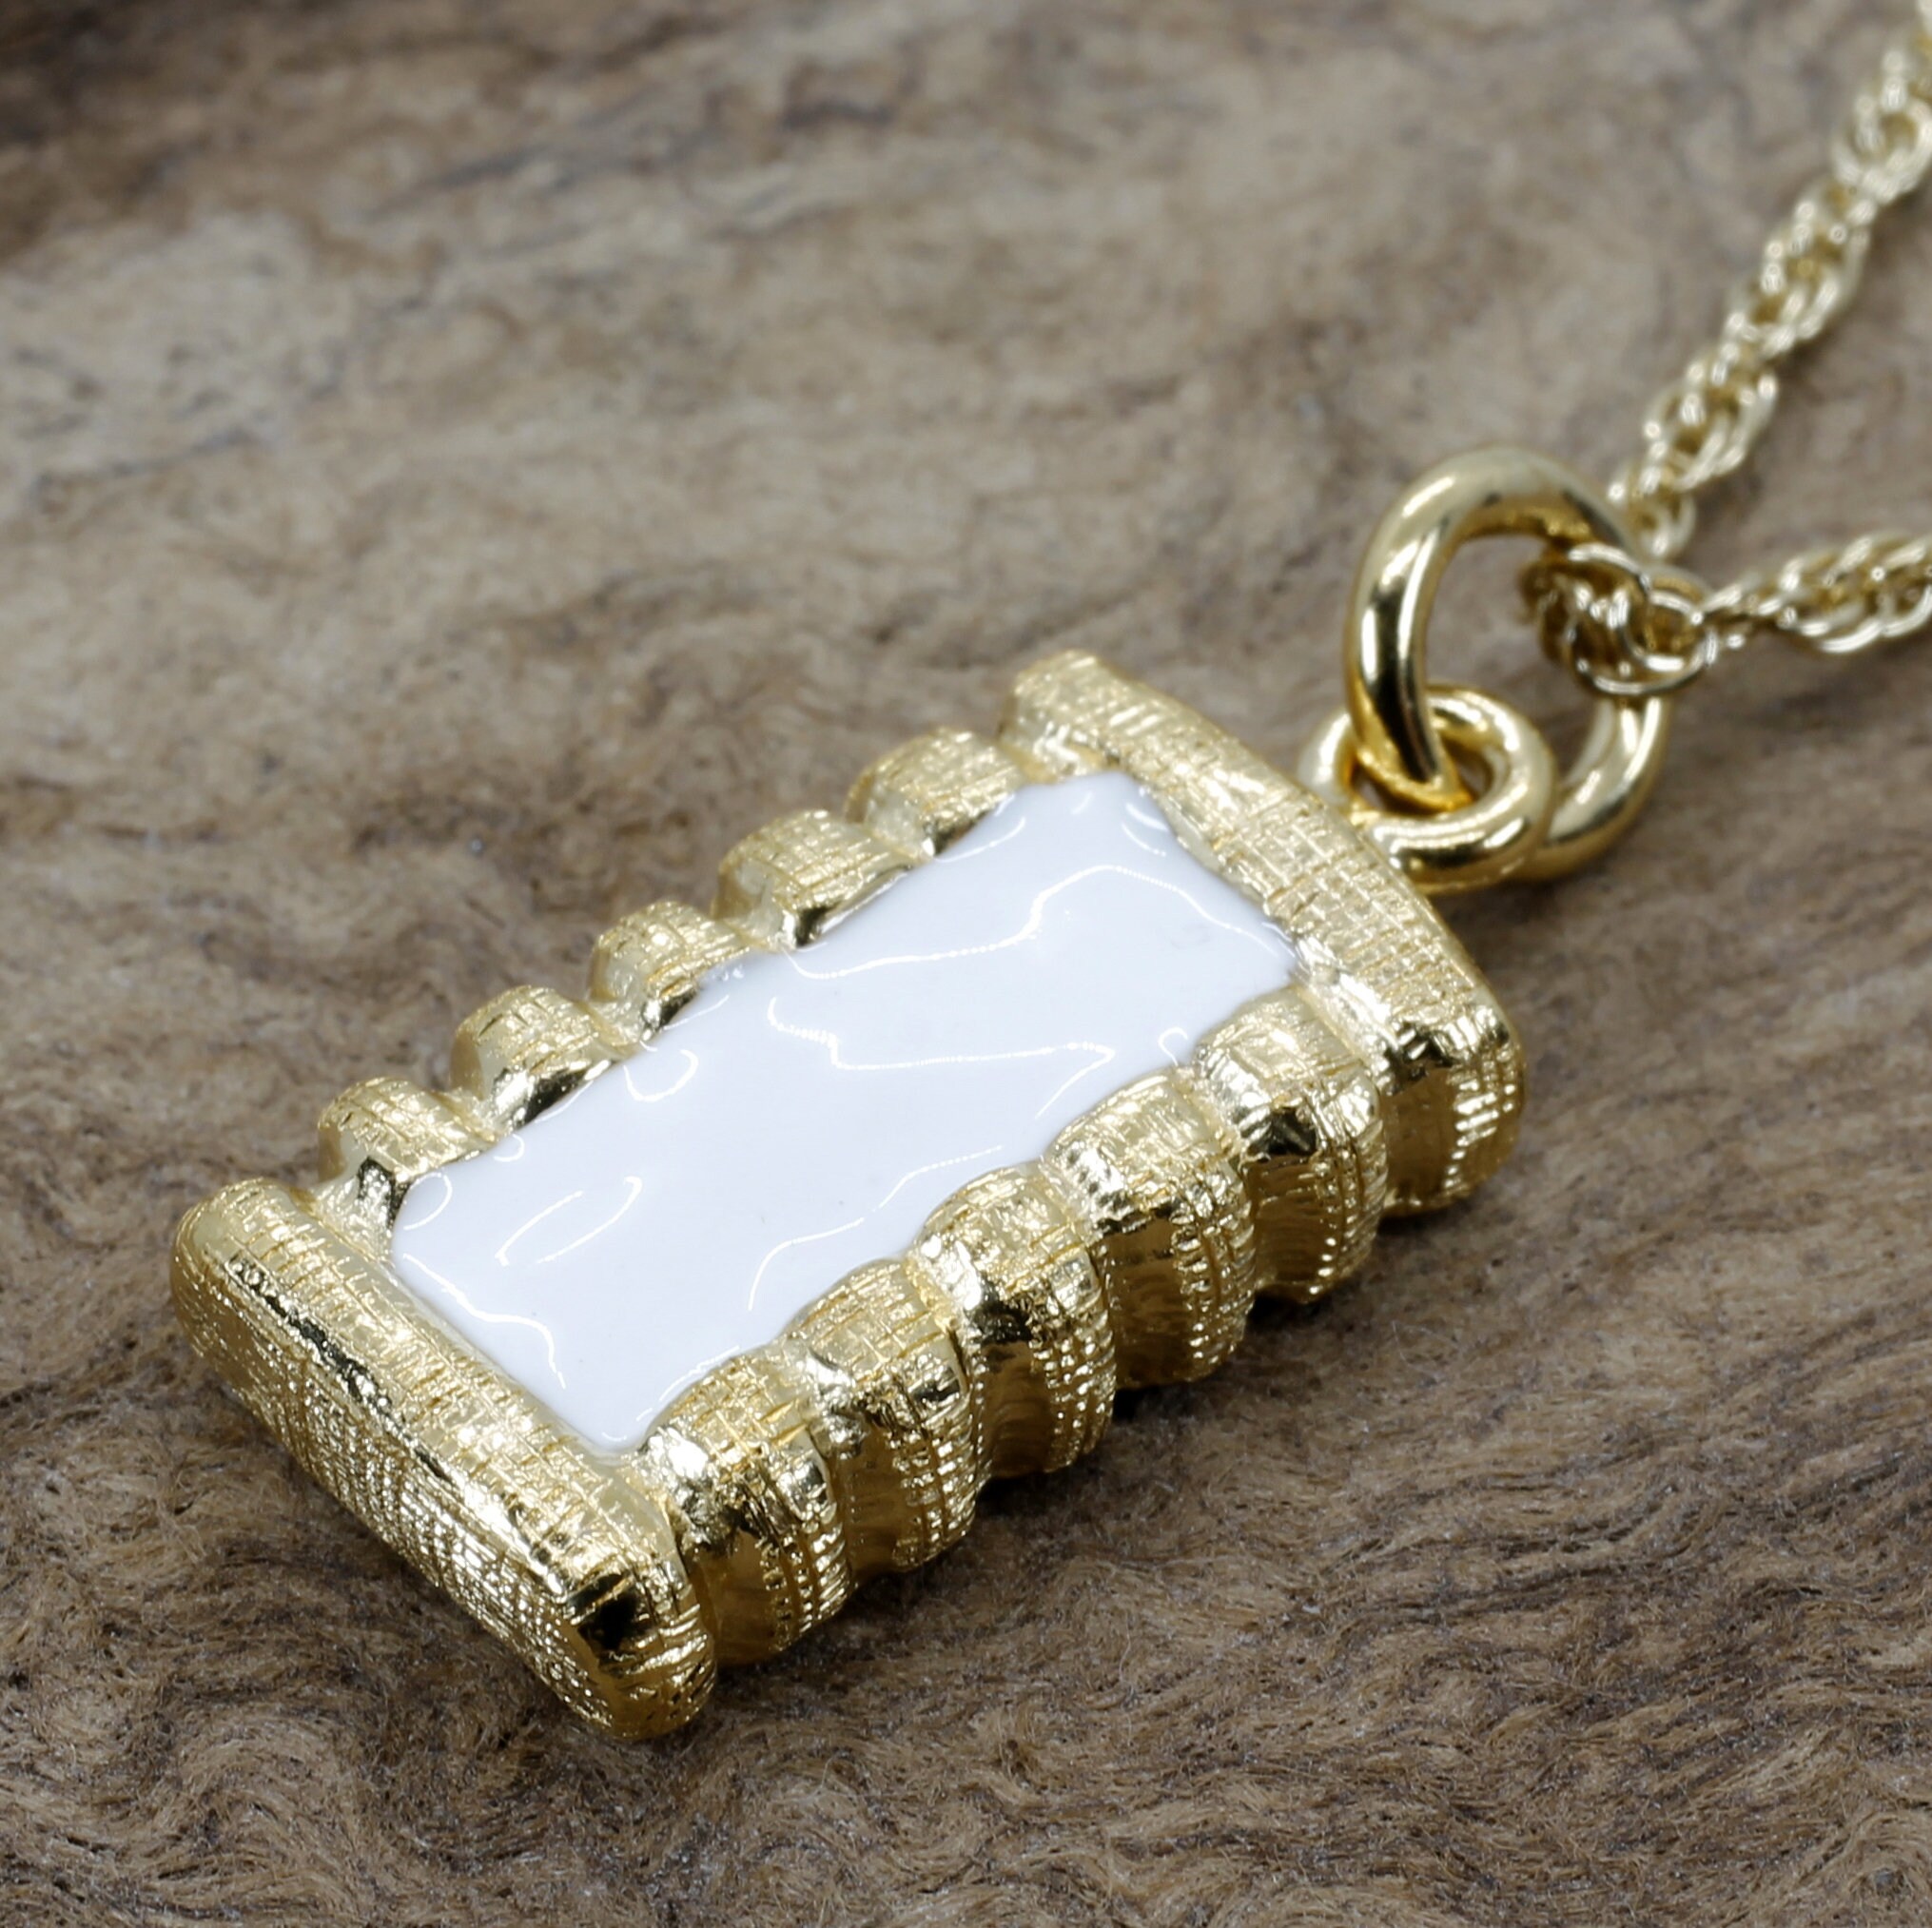 Cotton Bale Locket Necklace in 14kt Gold Vermeil with actual cotton inside 